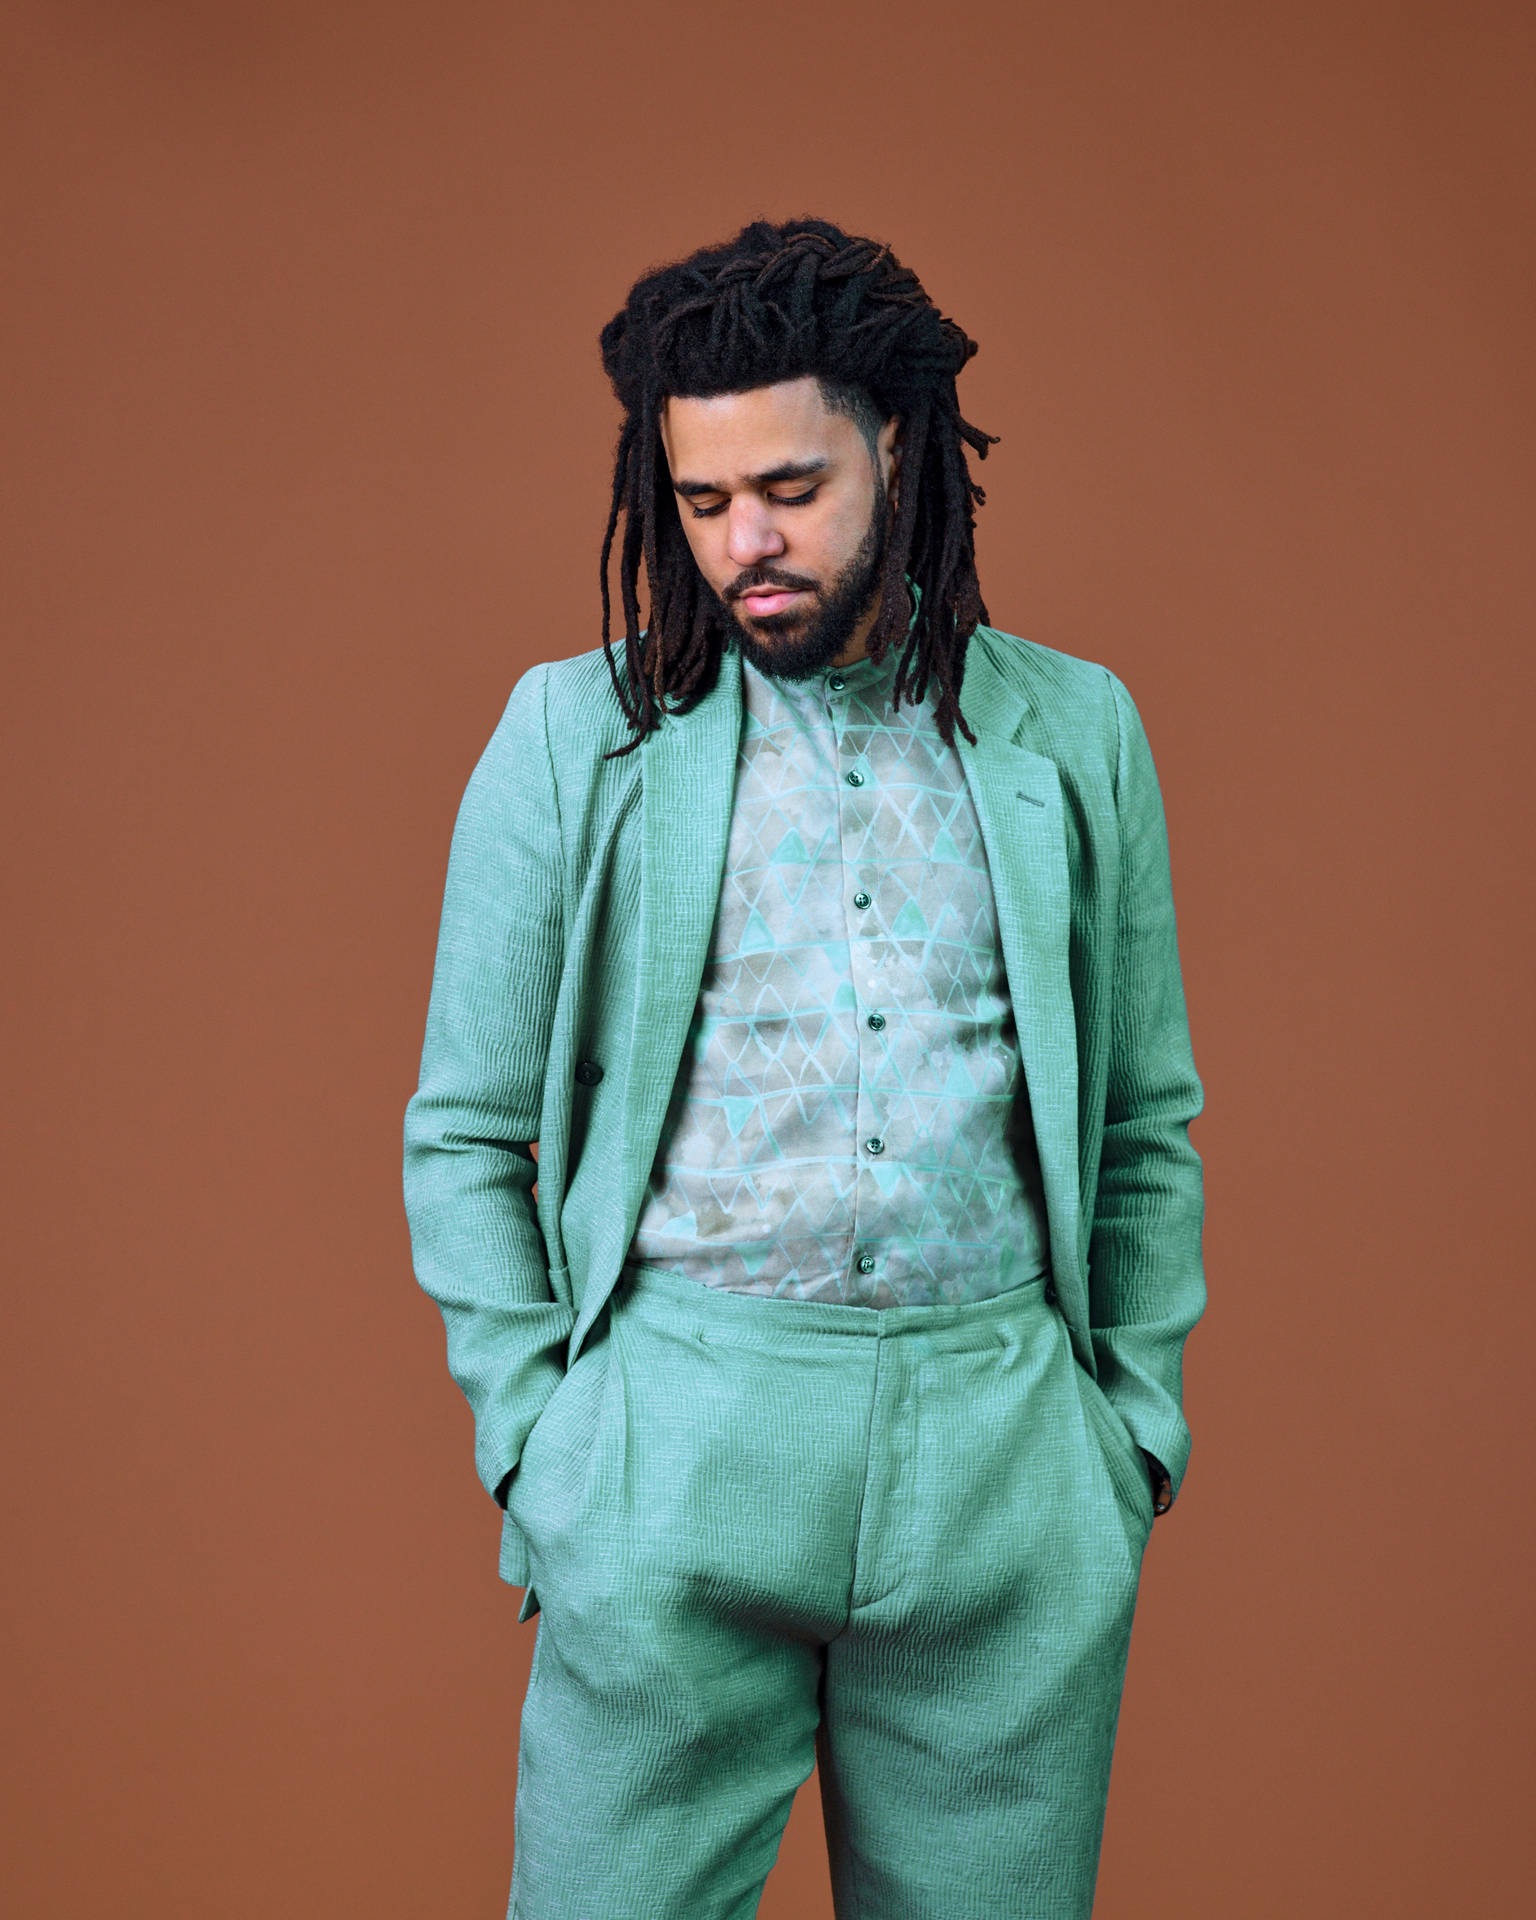 J Cole Green Suit Background